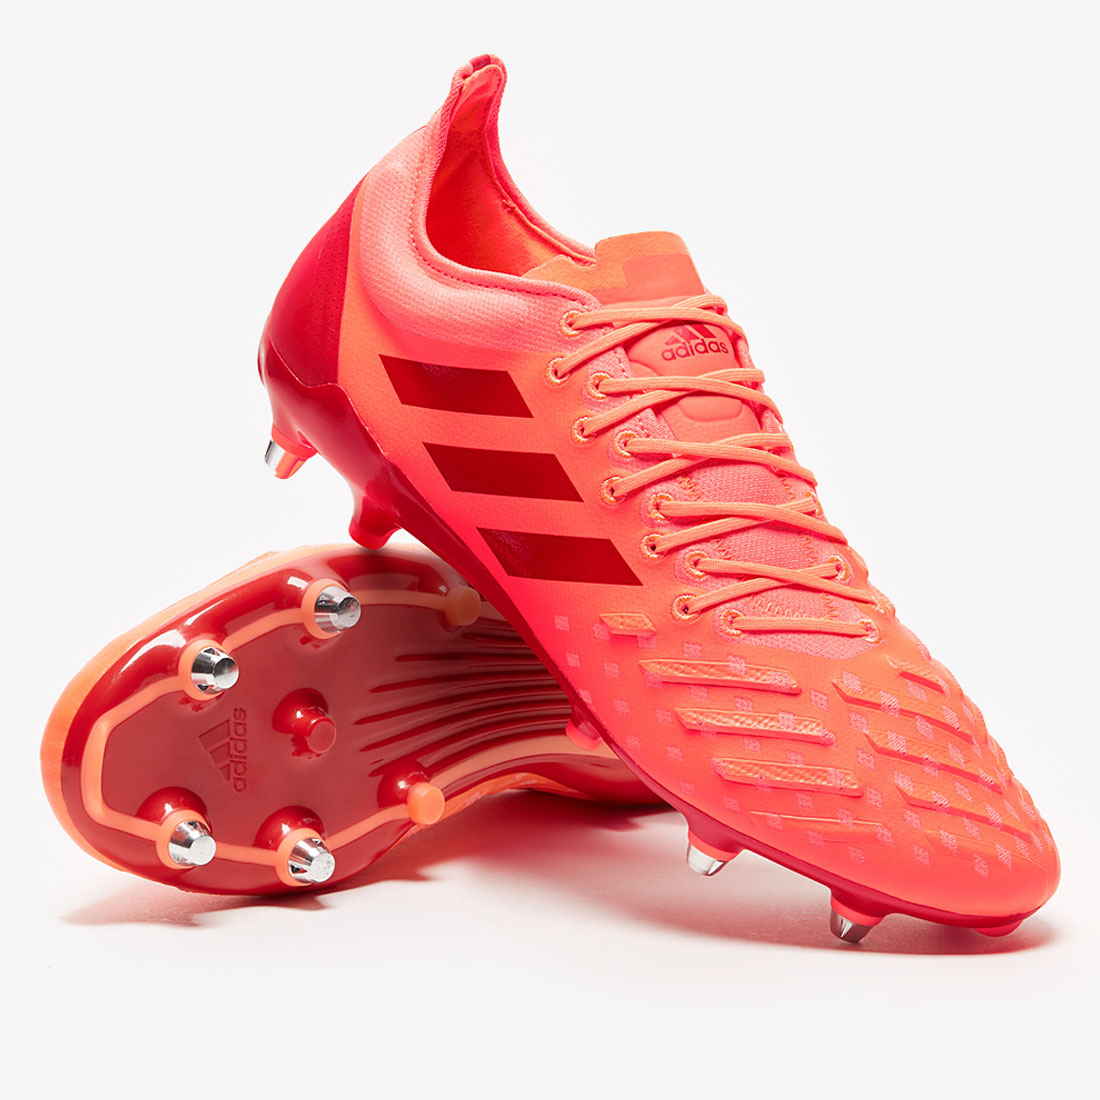 Predator Mens Coral XP Rugby Boots – Exclusive Sports